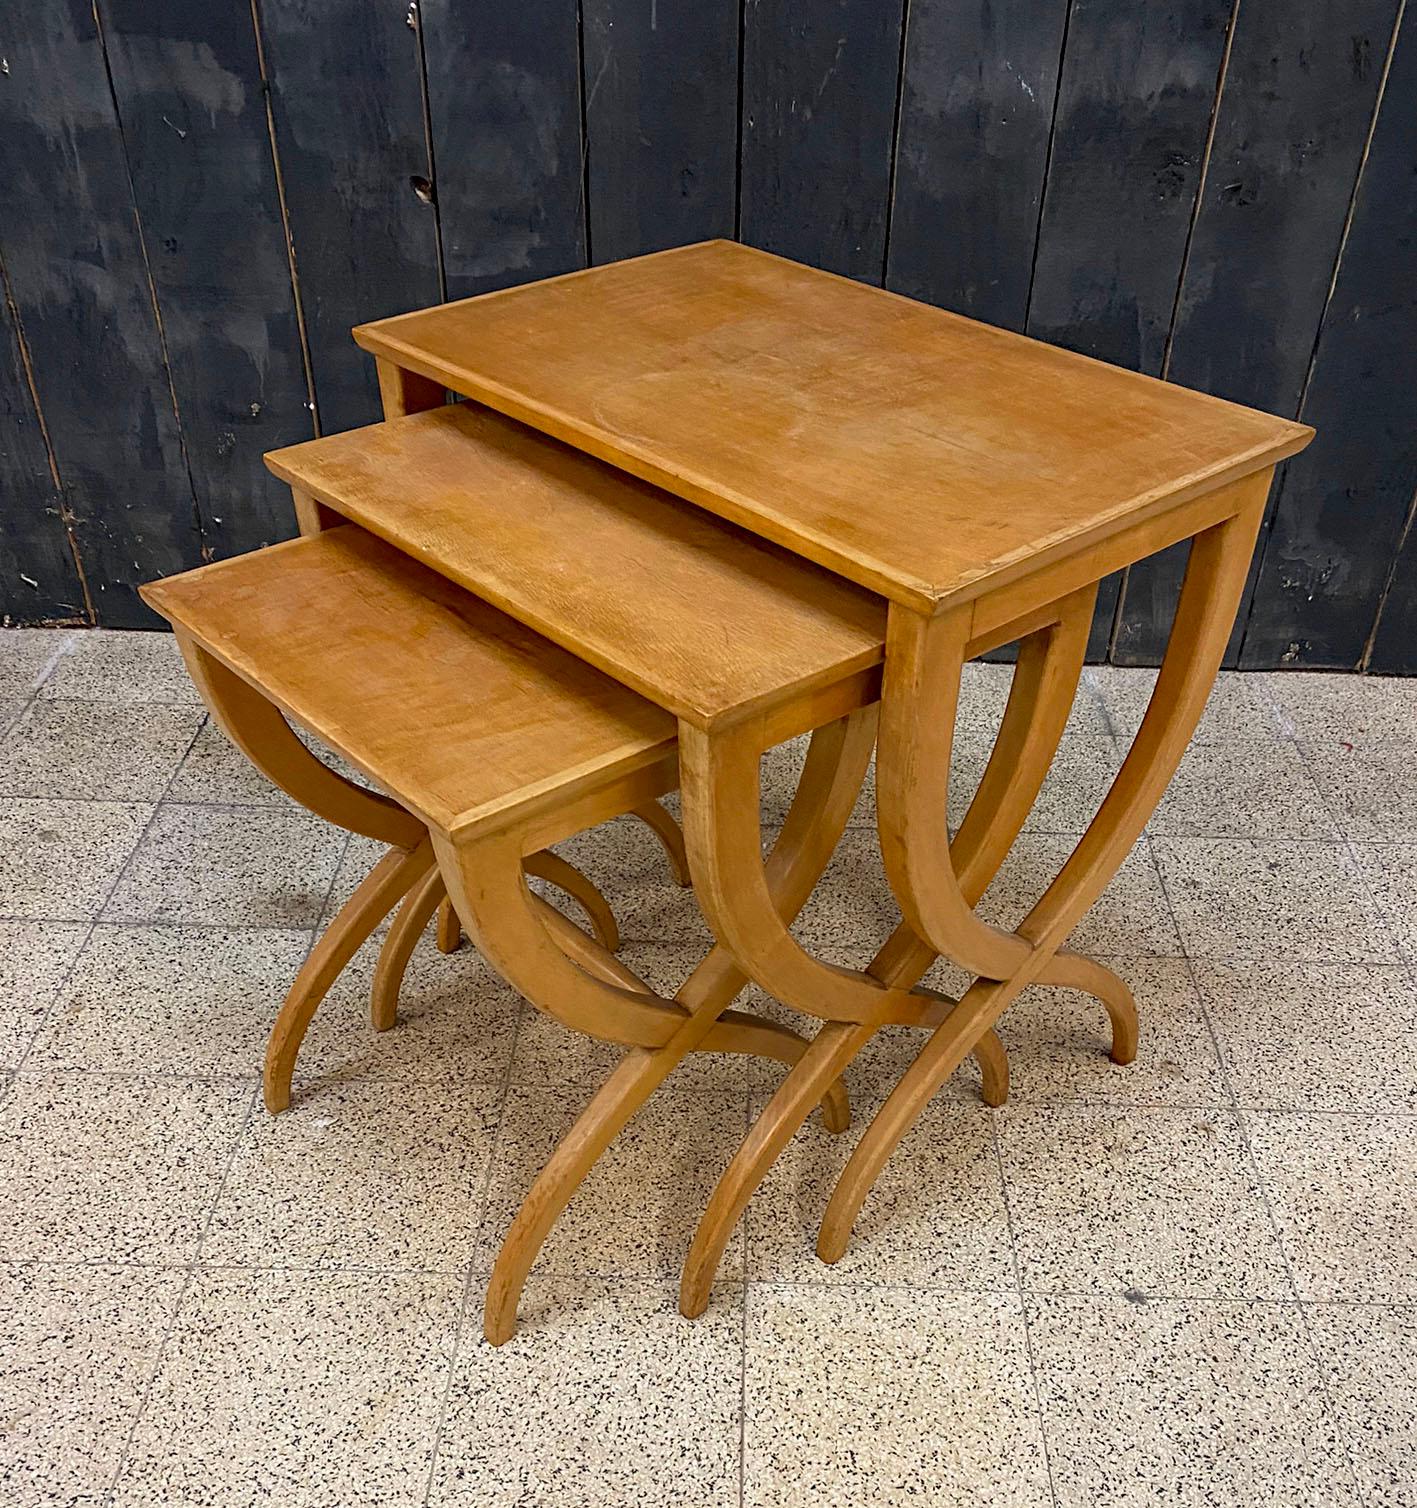 3 nesting tables in
stained beech circa 1940/1950